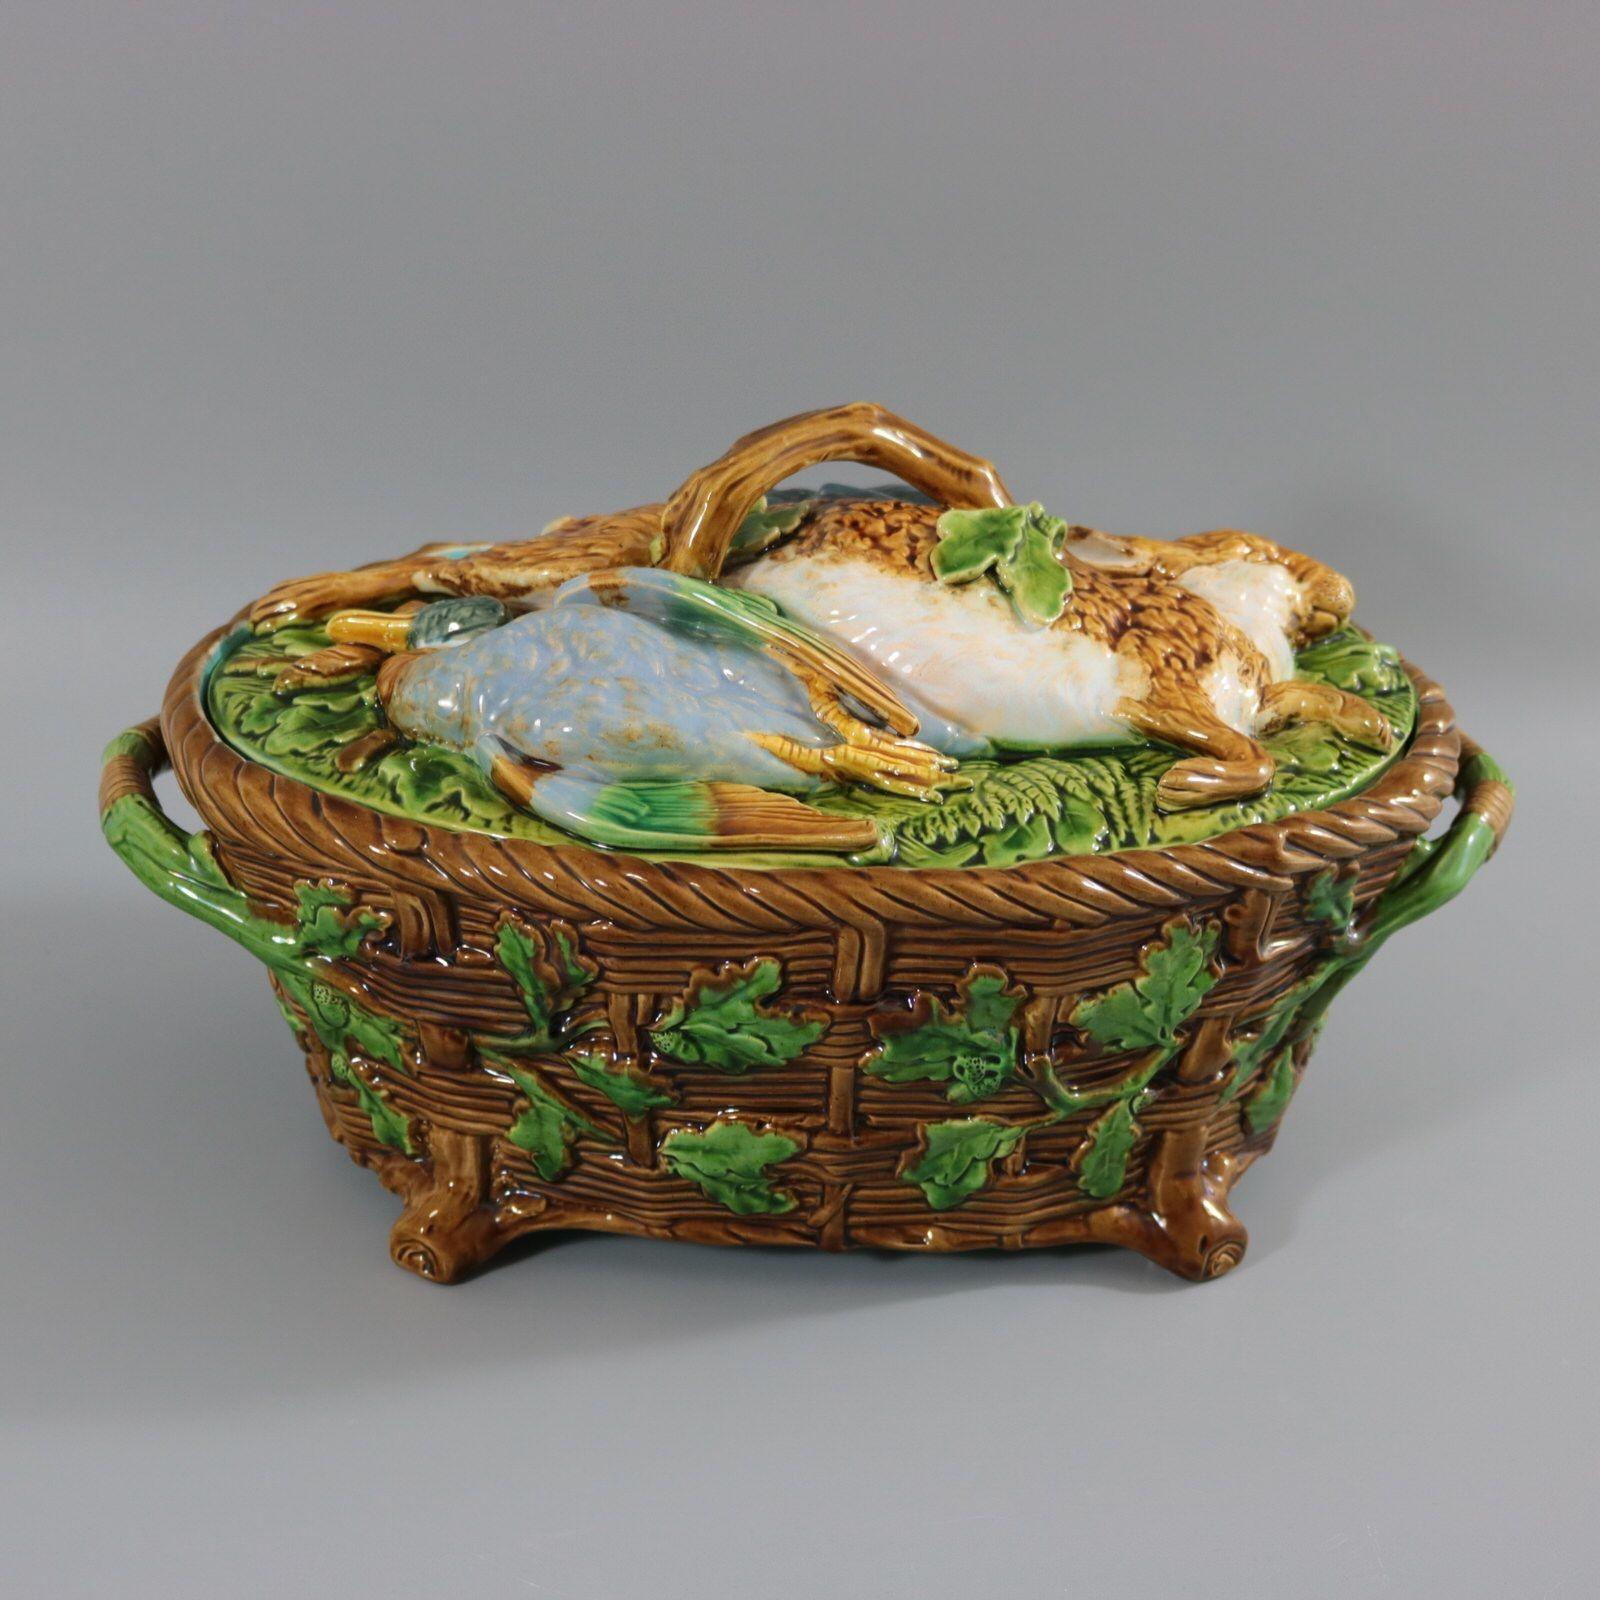 Minton Majolica game pie dish with liner which features a hare, mallard and blackbird on a bed of fern and oak leaves. Colouration: brown, green, white, are predominant. The piece bears maker's marks for the Minton pottery. Bears a pattern number,